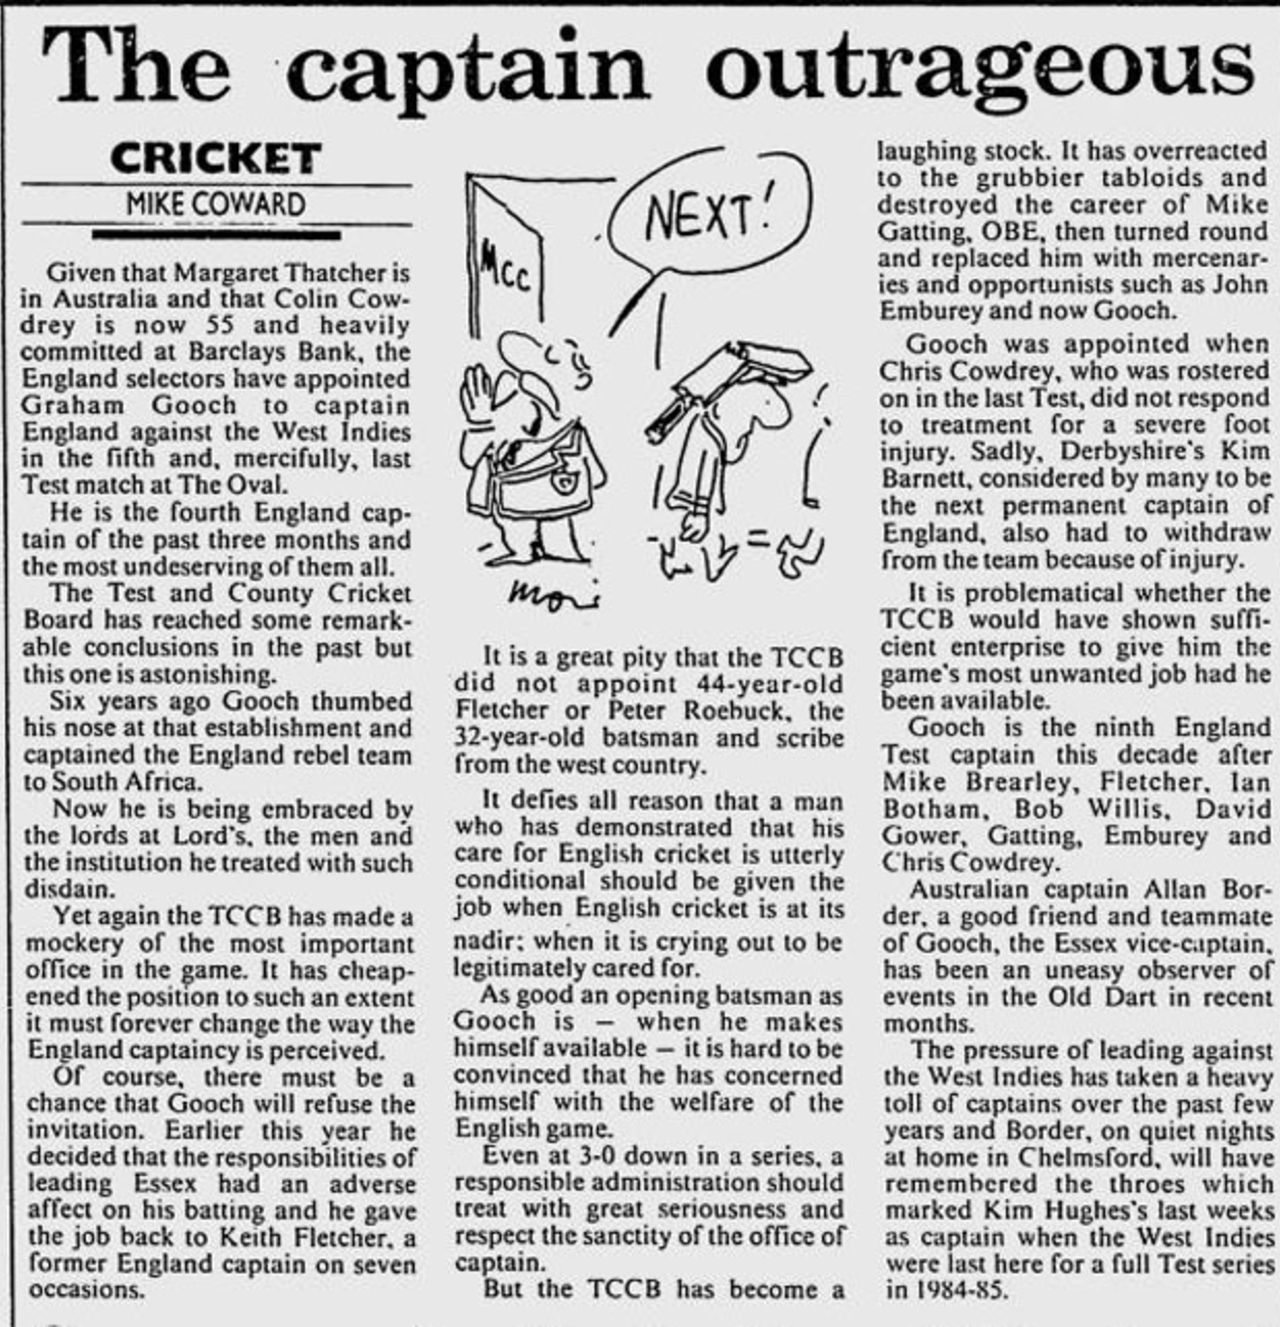 A news story about the number of captains used by England in the 1988 season